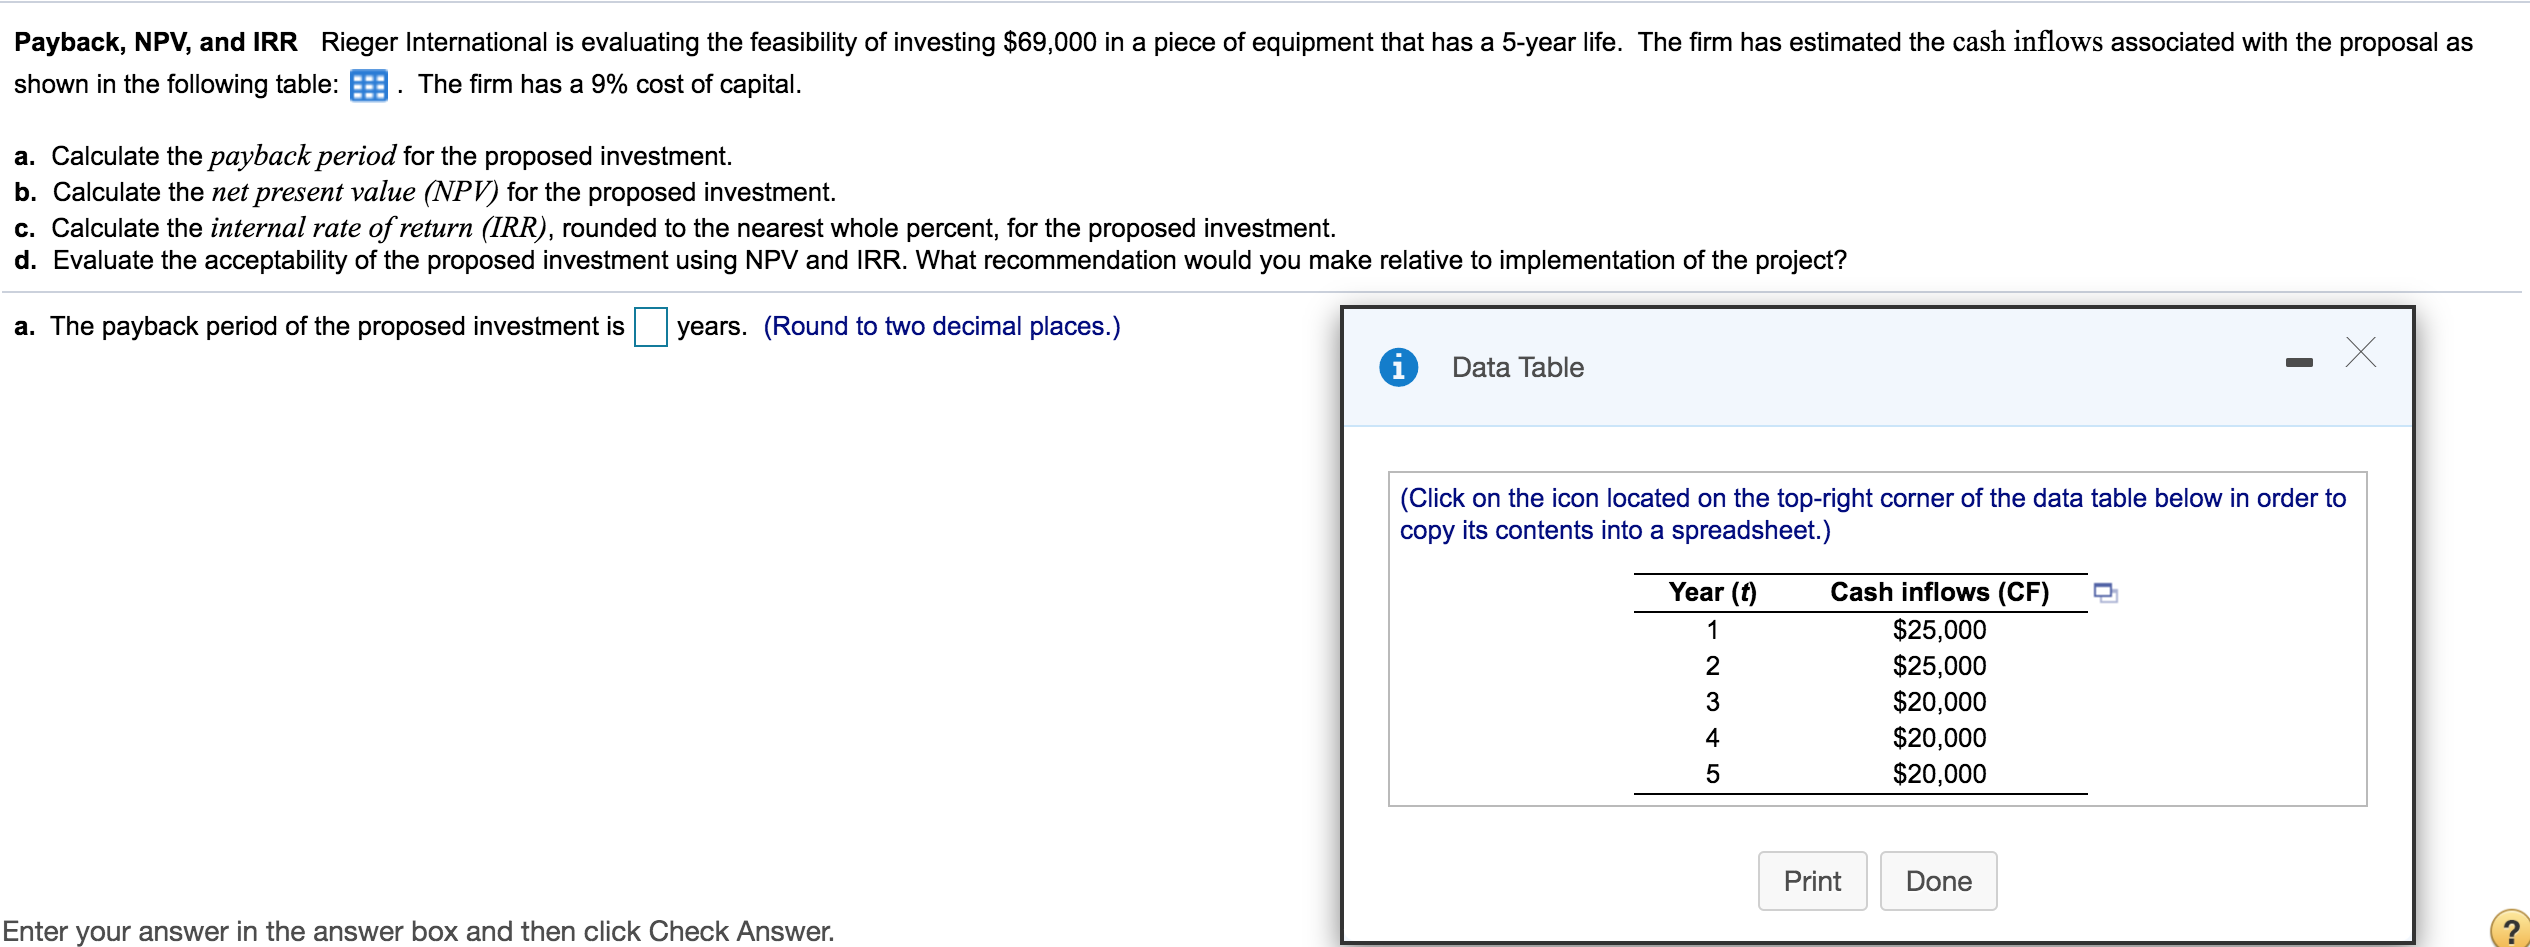 Payback, NPV, and IRR Rieger International is evaluating the feasibility of investing $69,000 in a piece of equipment that has a 5-year life. The firm has estimated the cash inflows associated with the proposal as
shown in the following table: . The firm has a 9% cost of capital.
a. Calculate the payback period for the proposed investment.
b. Calculate the net present value (NPV) for the proposed investment.
c. Calculate the internal rate of return (IRR), rounded to the nearest whole percent, for the proposed investment.
d. Evaluate the acceptability of the proposed investment using NPV and IRR. What recommendation would you make relative to implementation of the project?
a. The payback period of the proposed investment is
years. (Round to two decimal places.)
Data Table
|(Click on the icon located on the top-right corner of the data table below in order to
copy its contents into a spreadsheet.)
Year (f)
Cash inflows (CF)
$25,000
$25,000
$20,000
$20,000
1
3
4
$20,000
Print
Done
Enter your answer in the answer box and then click Check Answer.
